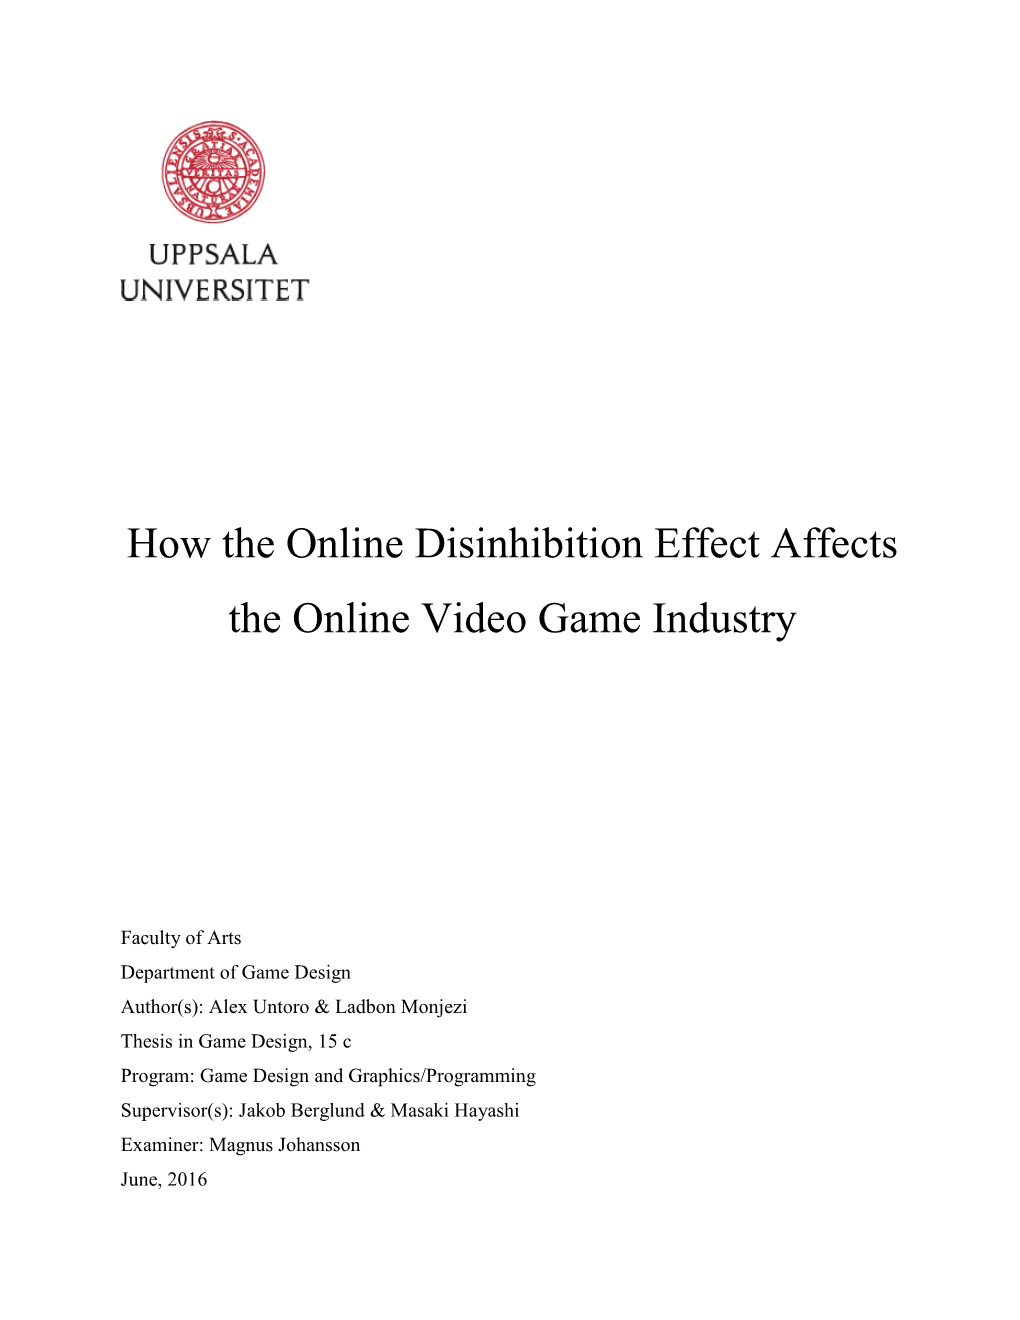 How the Online Disinhibition Effect Affects the Online Video Game